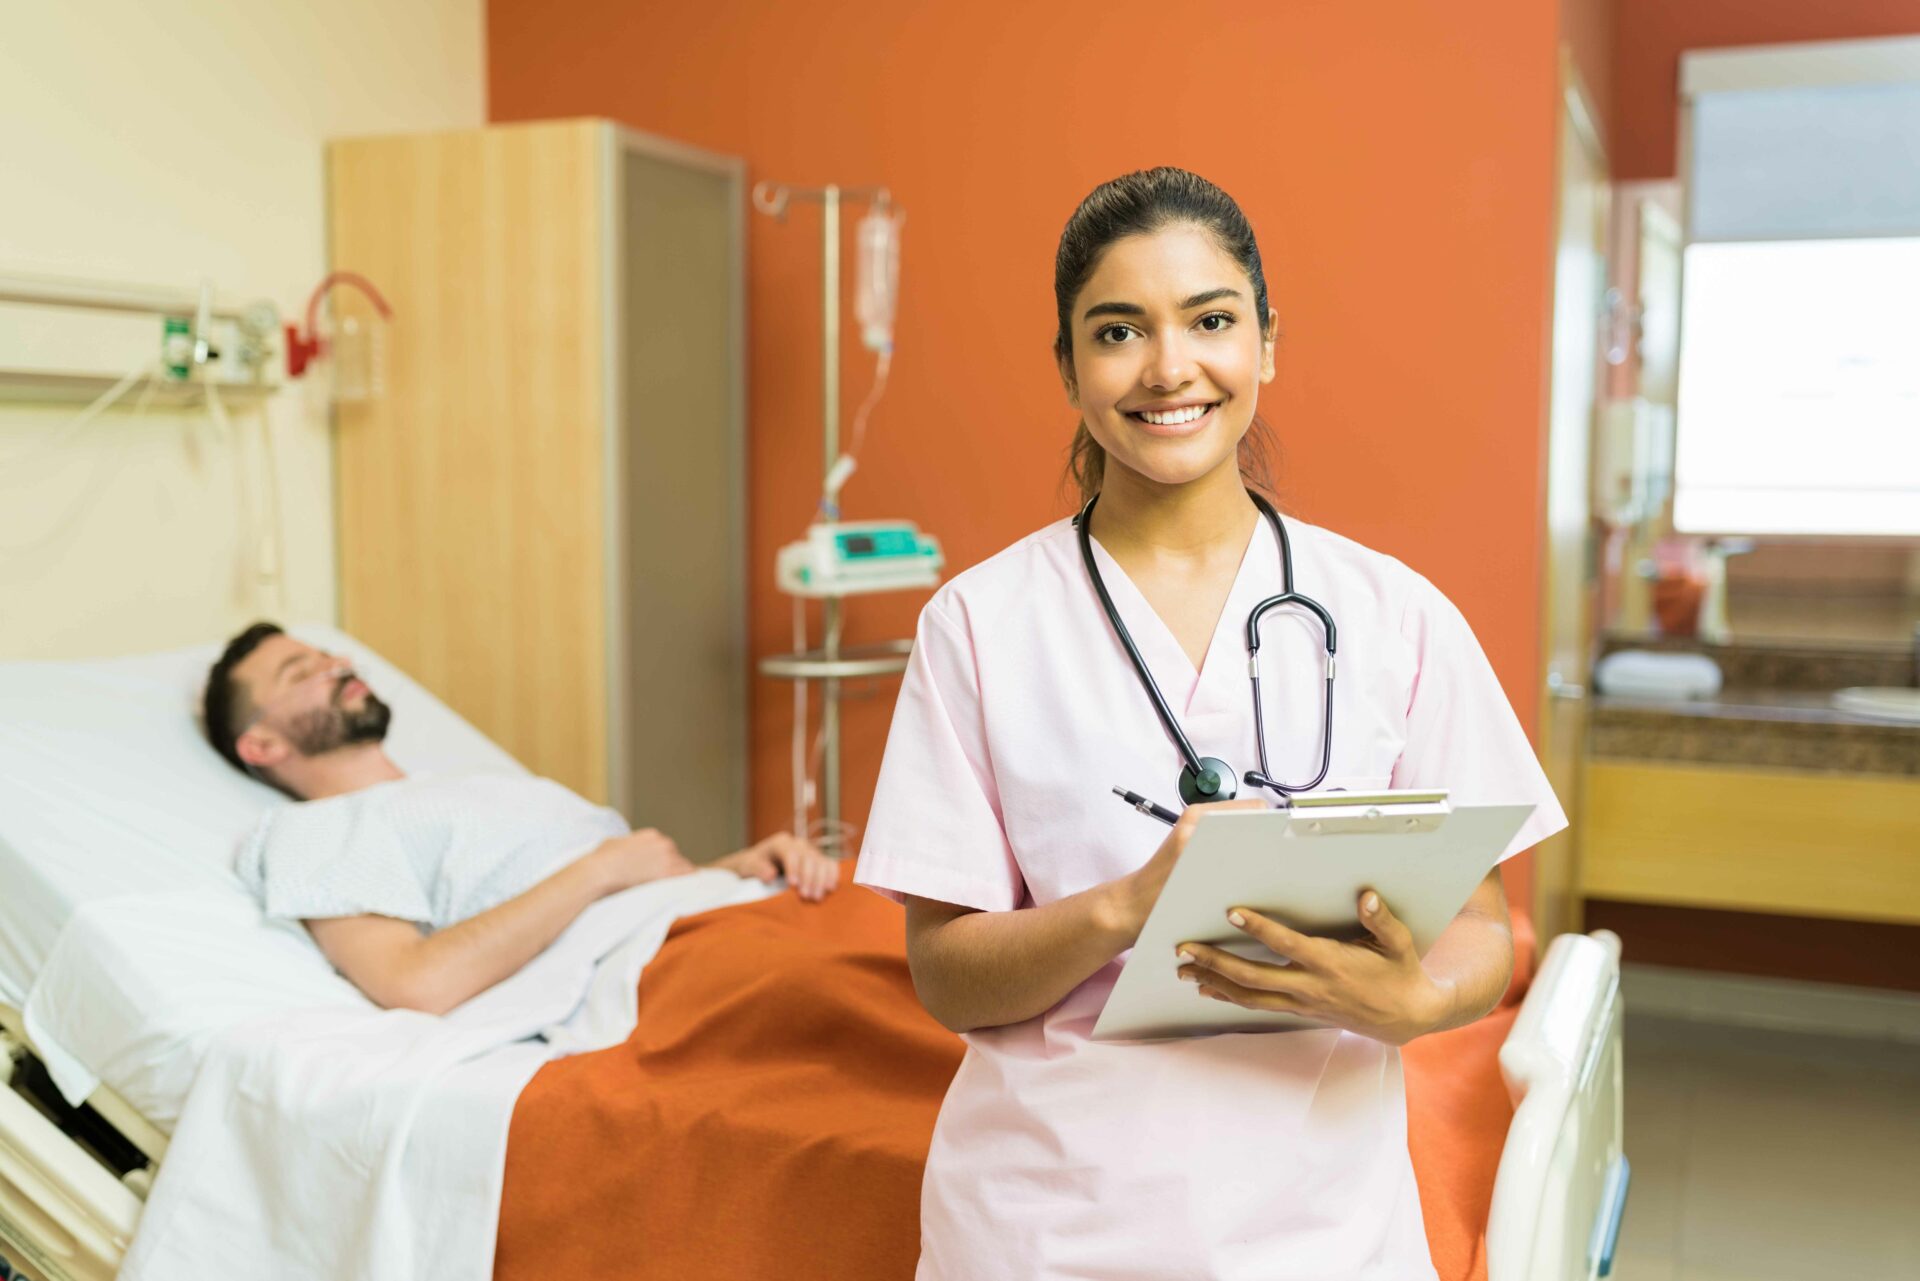 Sustainable Fashion Trends for Nurses